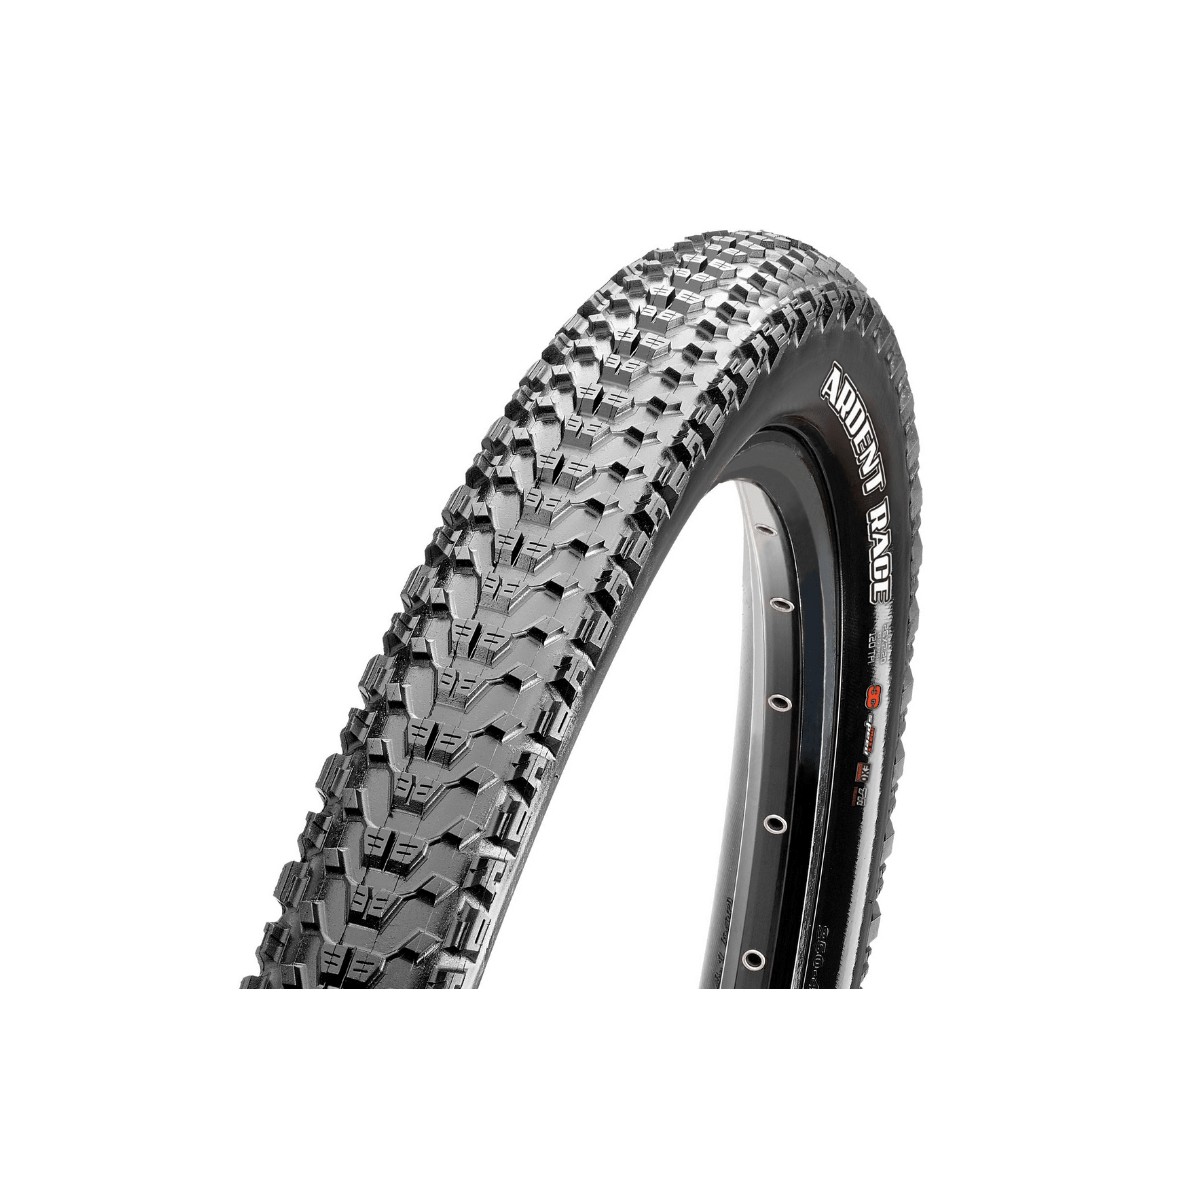 Maxxis Ardent Race 29 * 2.20 Exo Tubeless Ready Tire